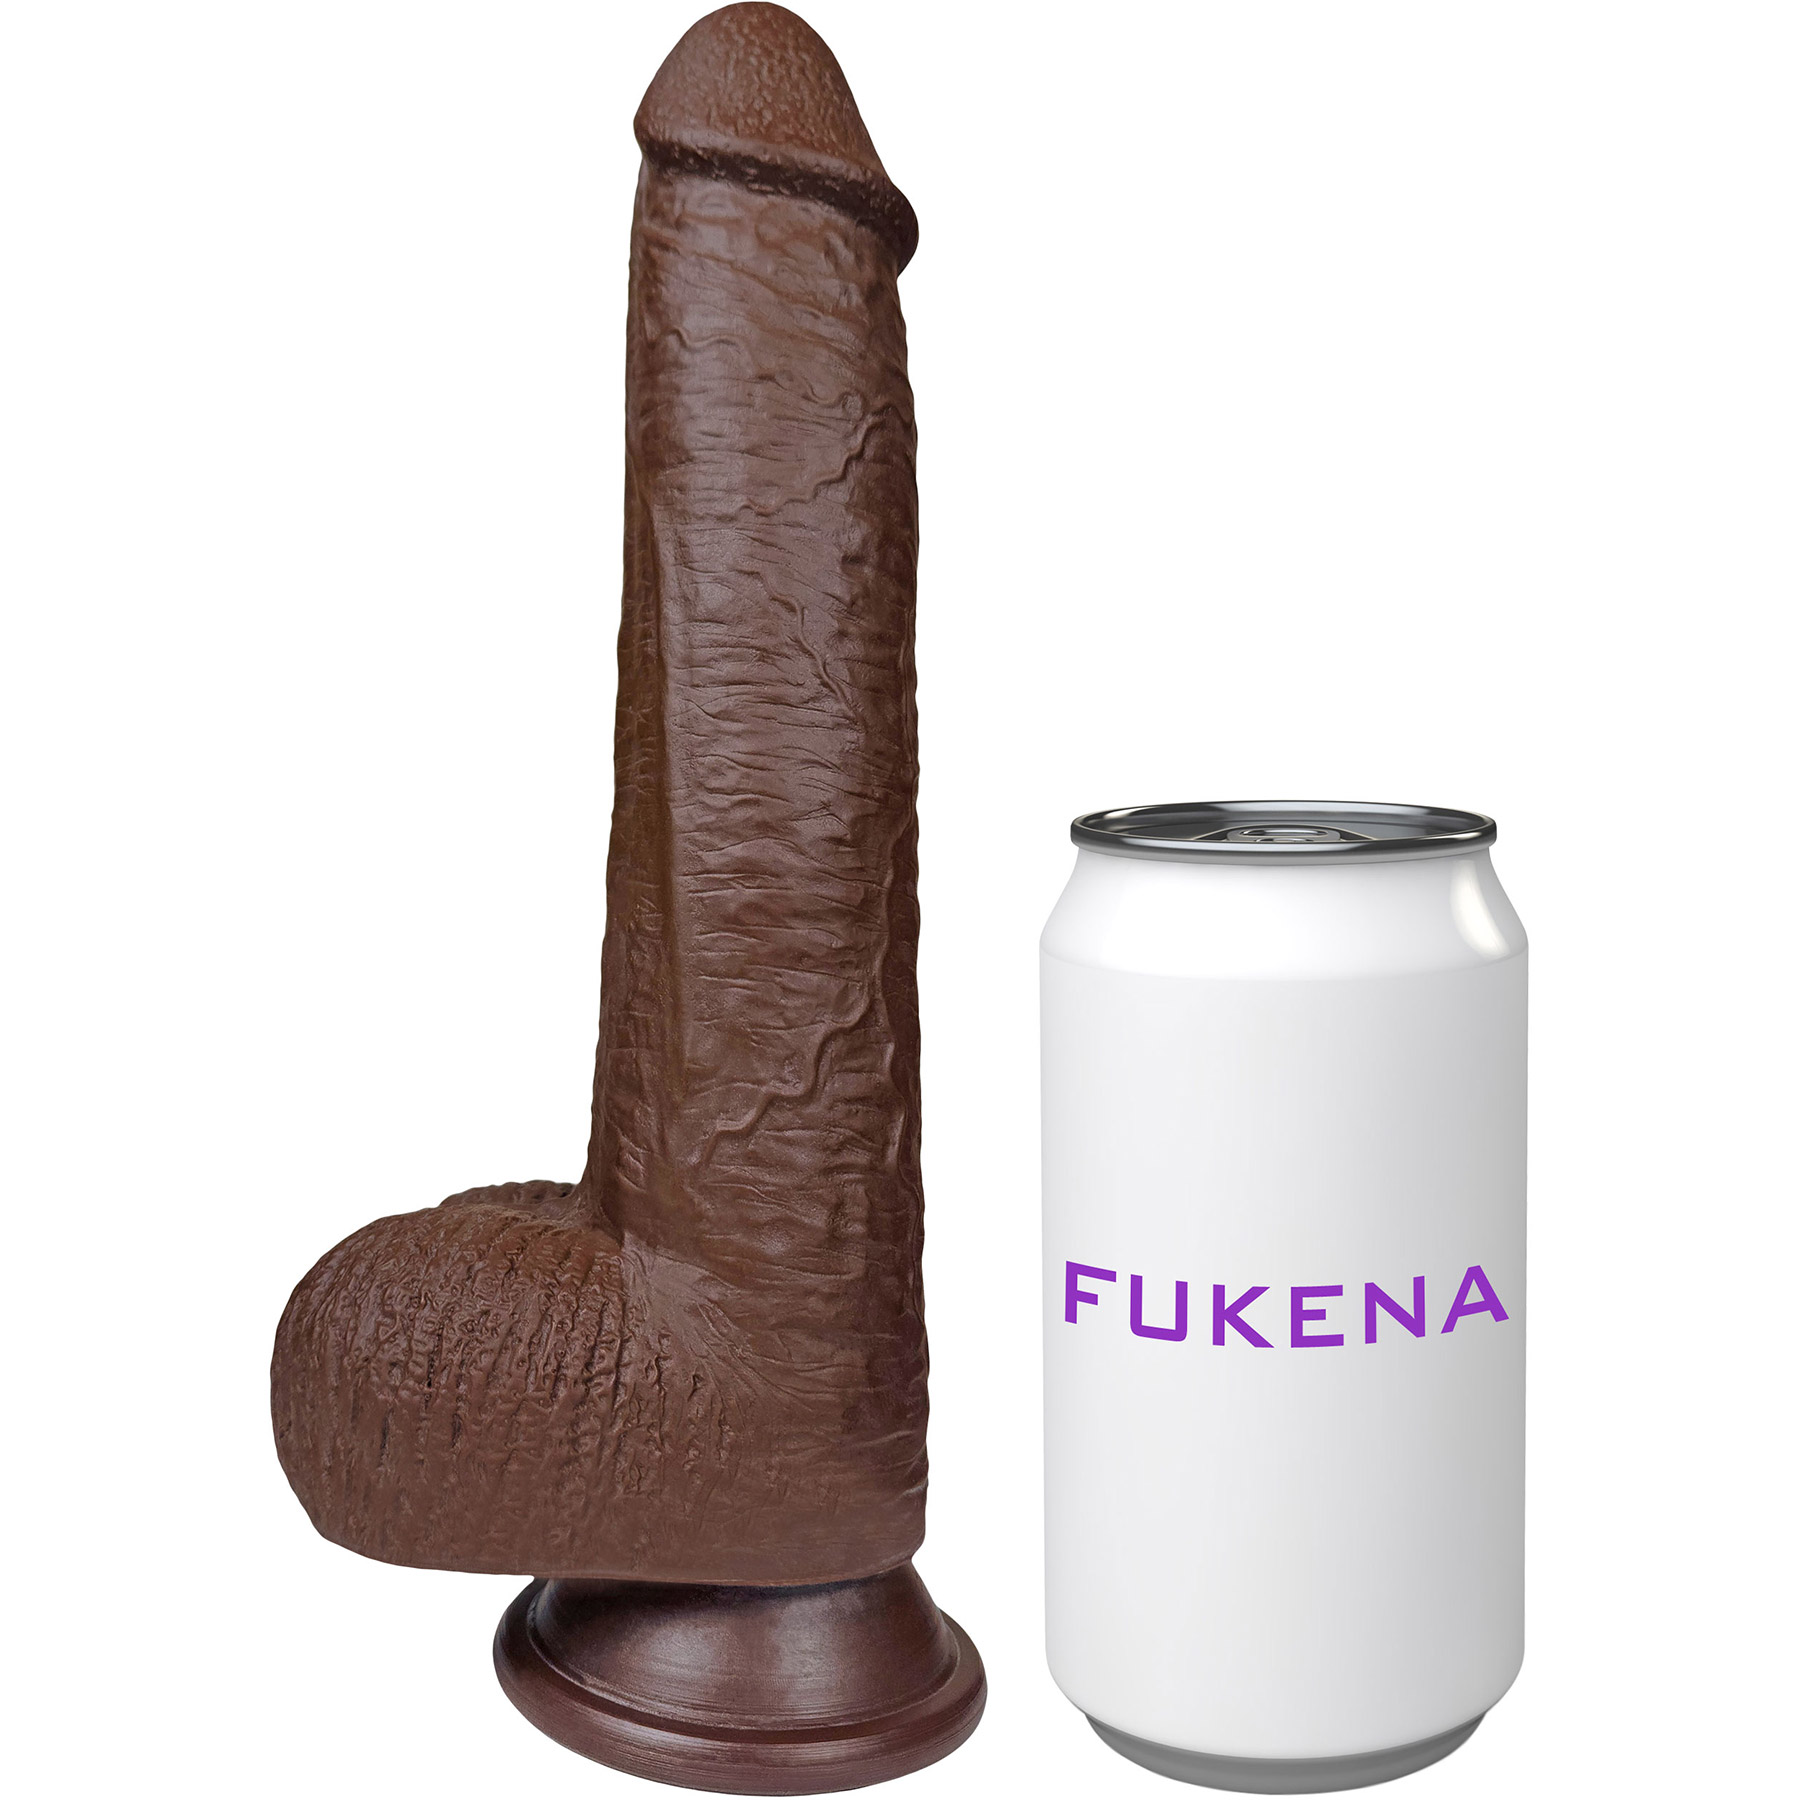 The Engineer 7 Inch Silicone Realistic Dildo With Balls & Suction Cup Base - Measurements